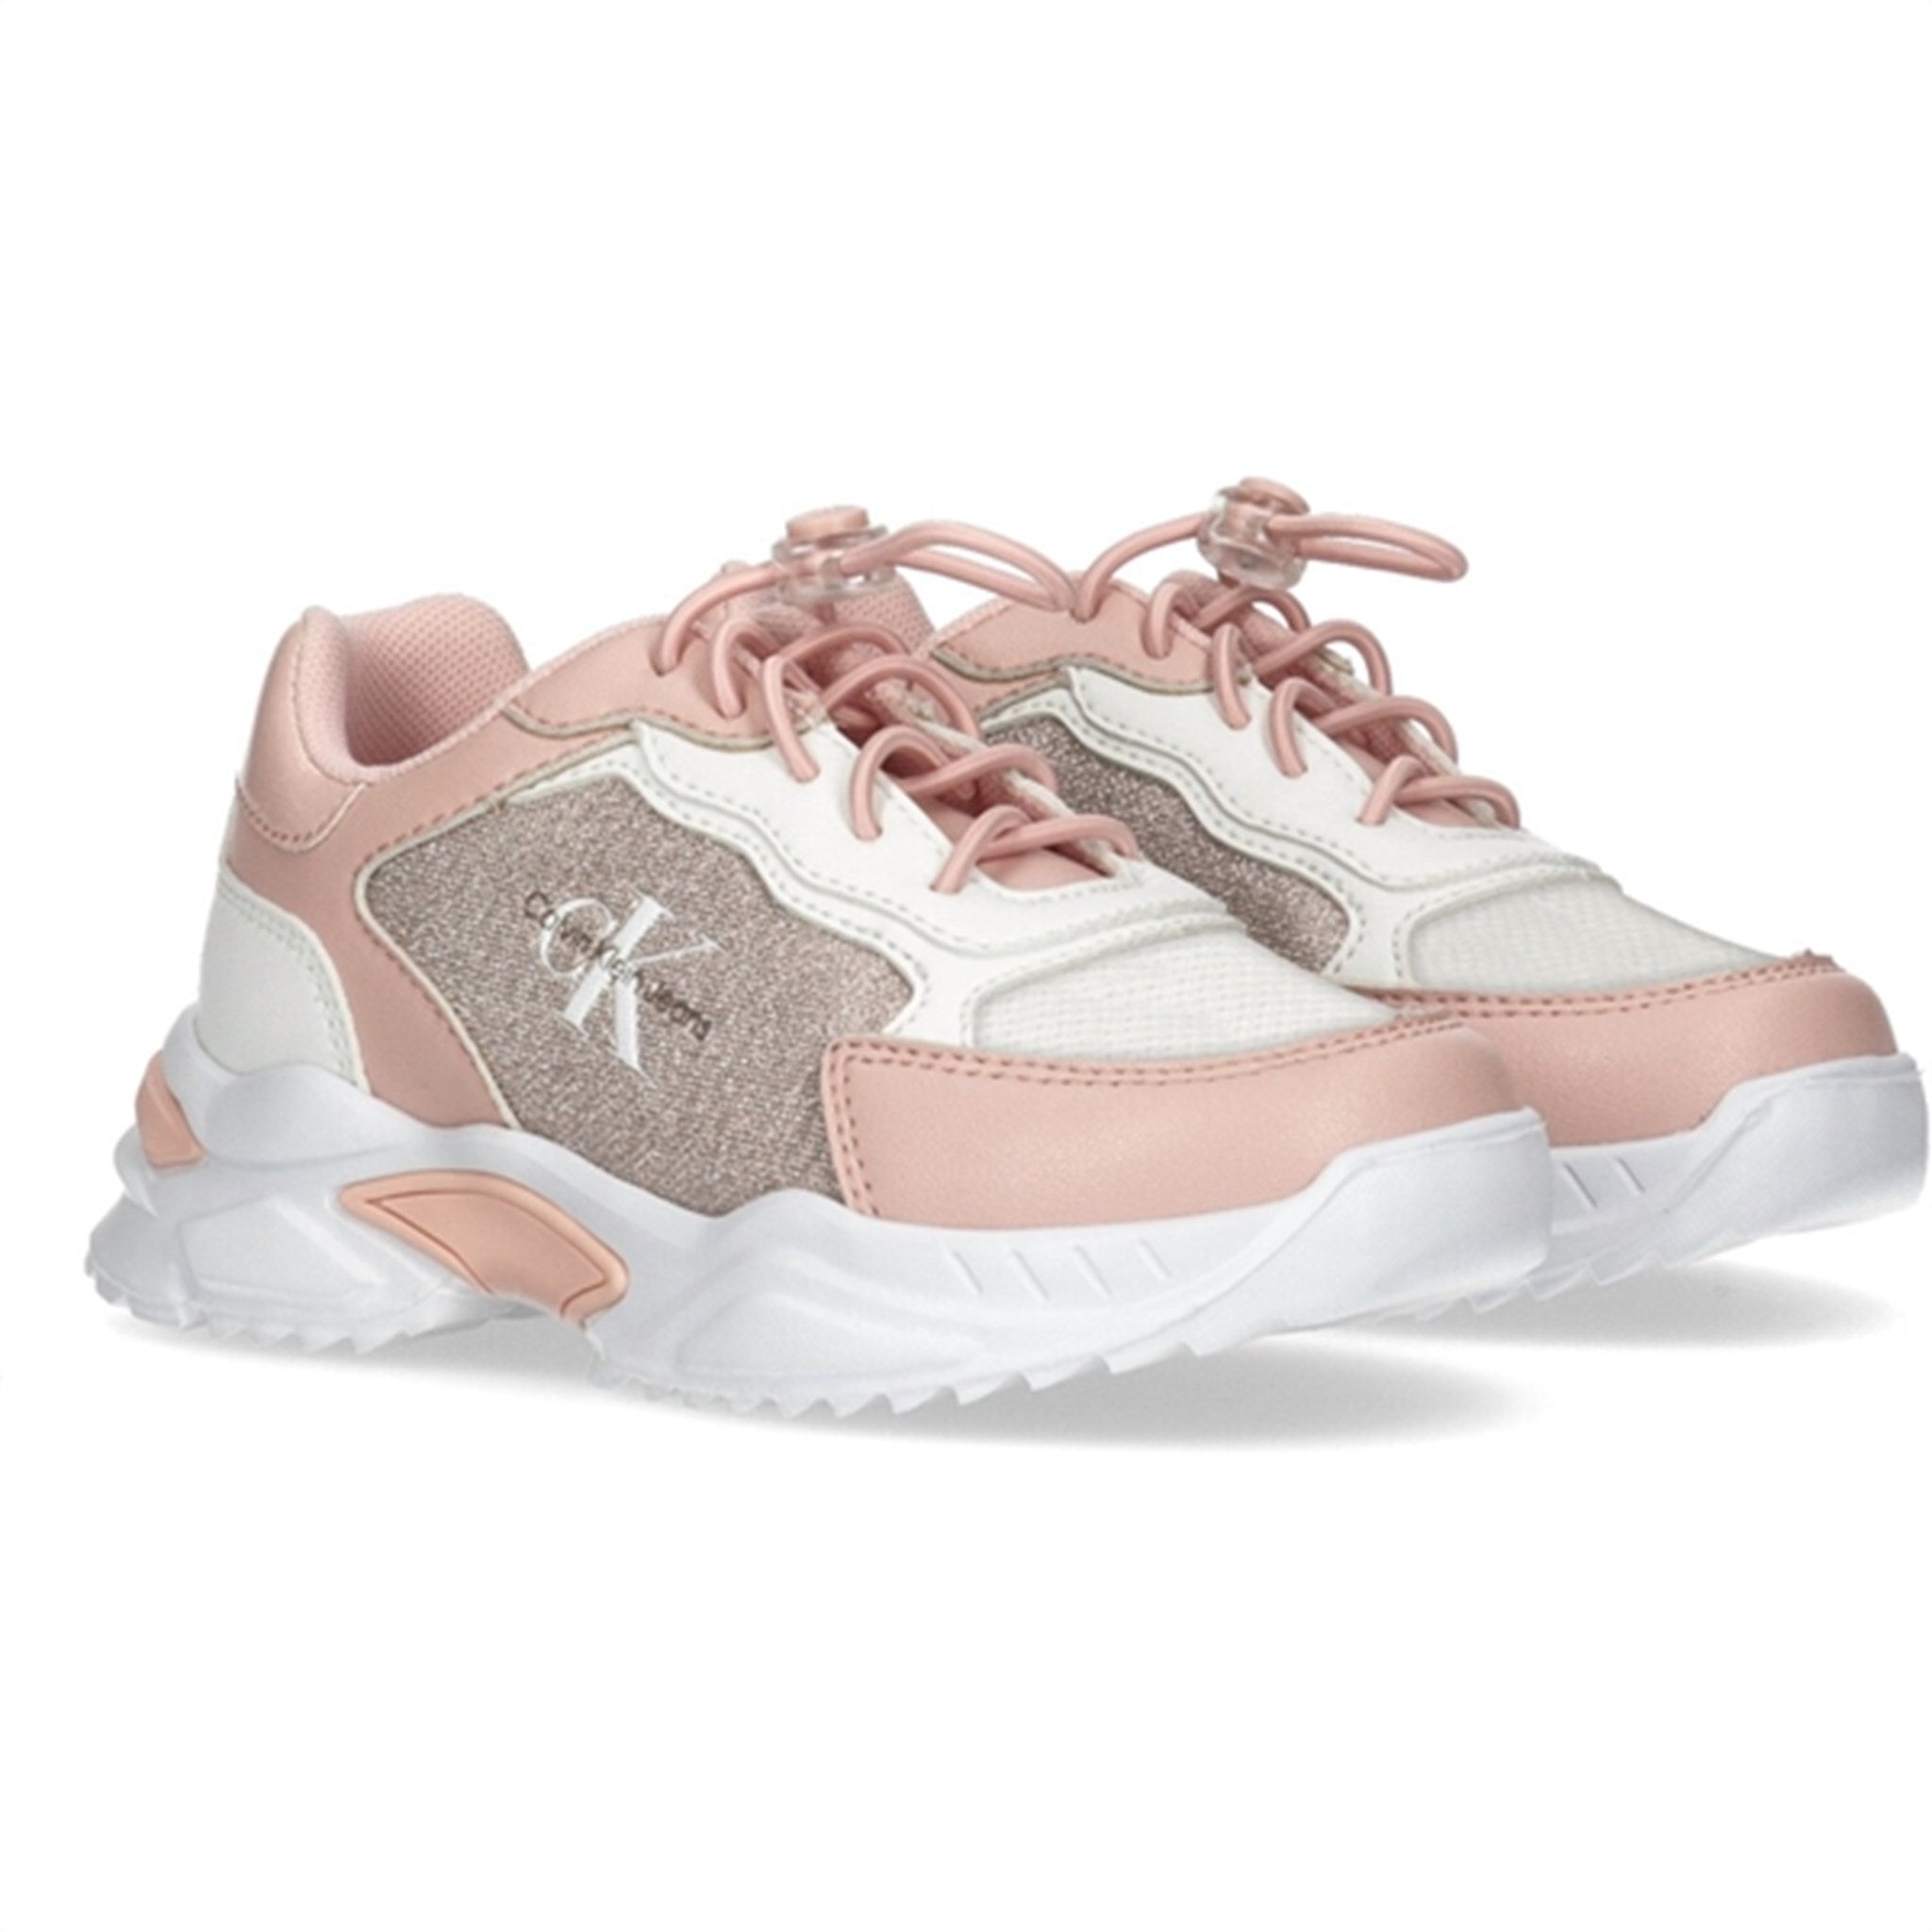 Calvin Klein Low Cut Lace-Up Sneakers Pink/White 3